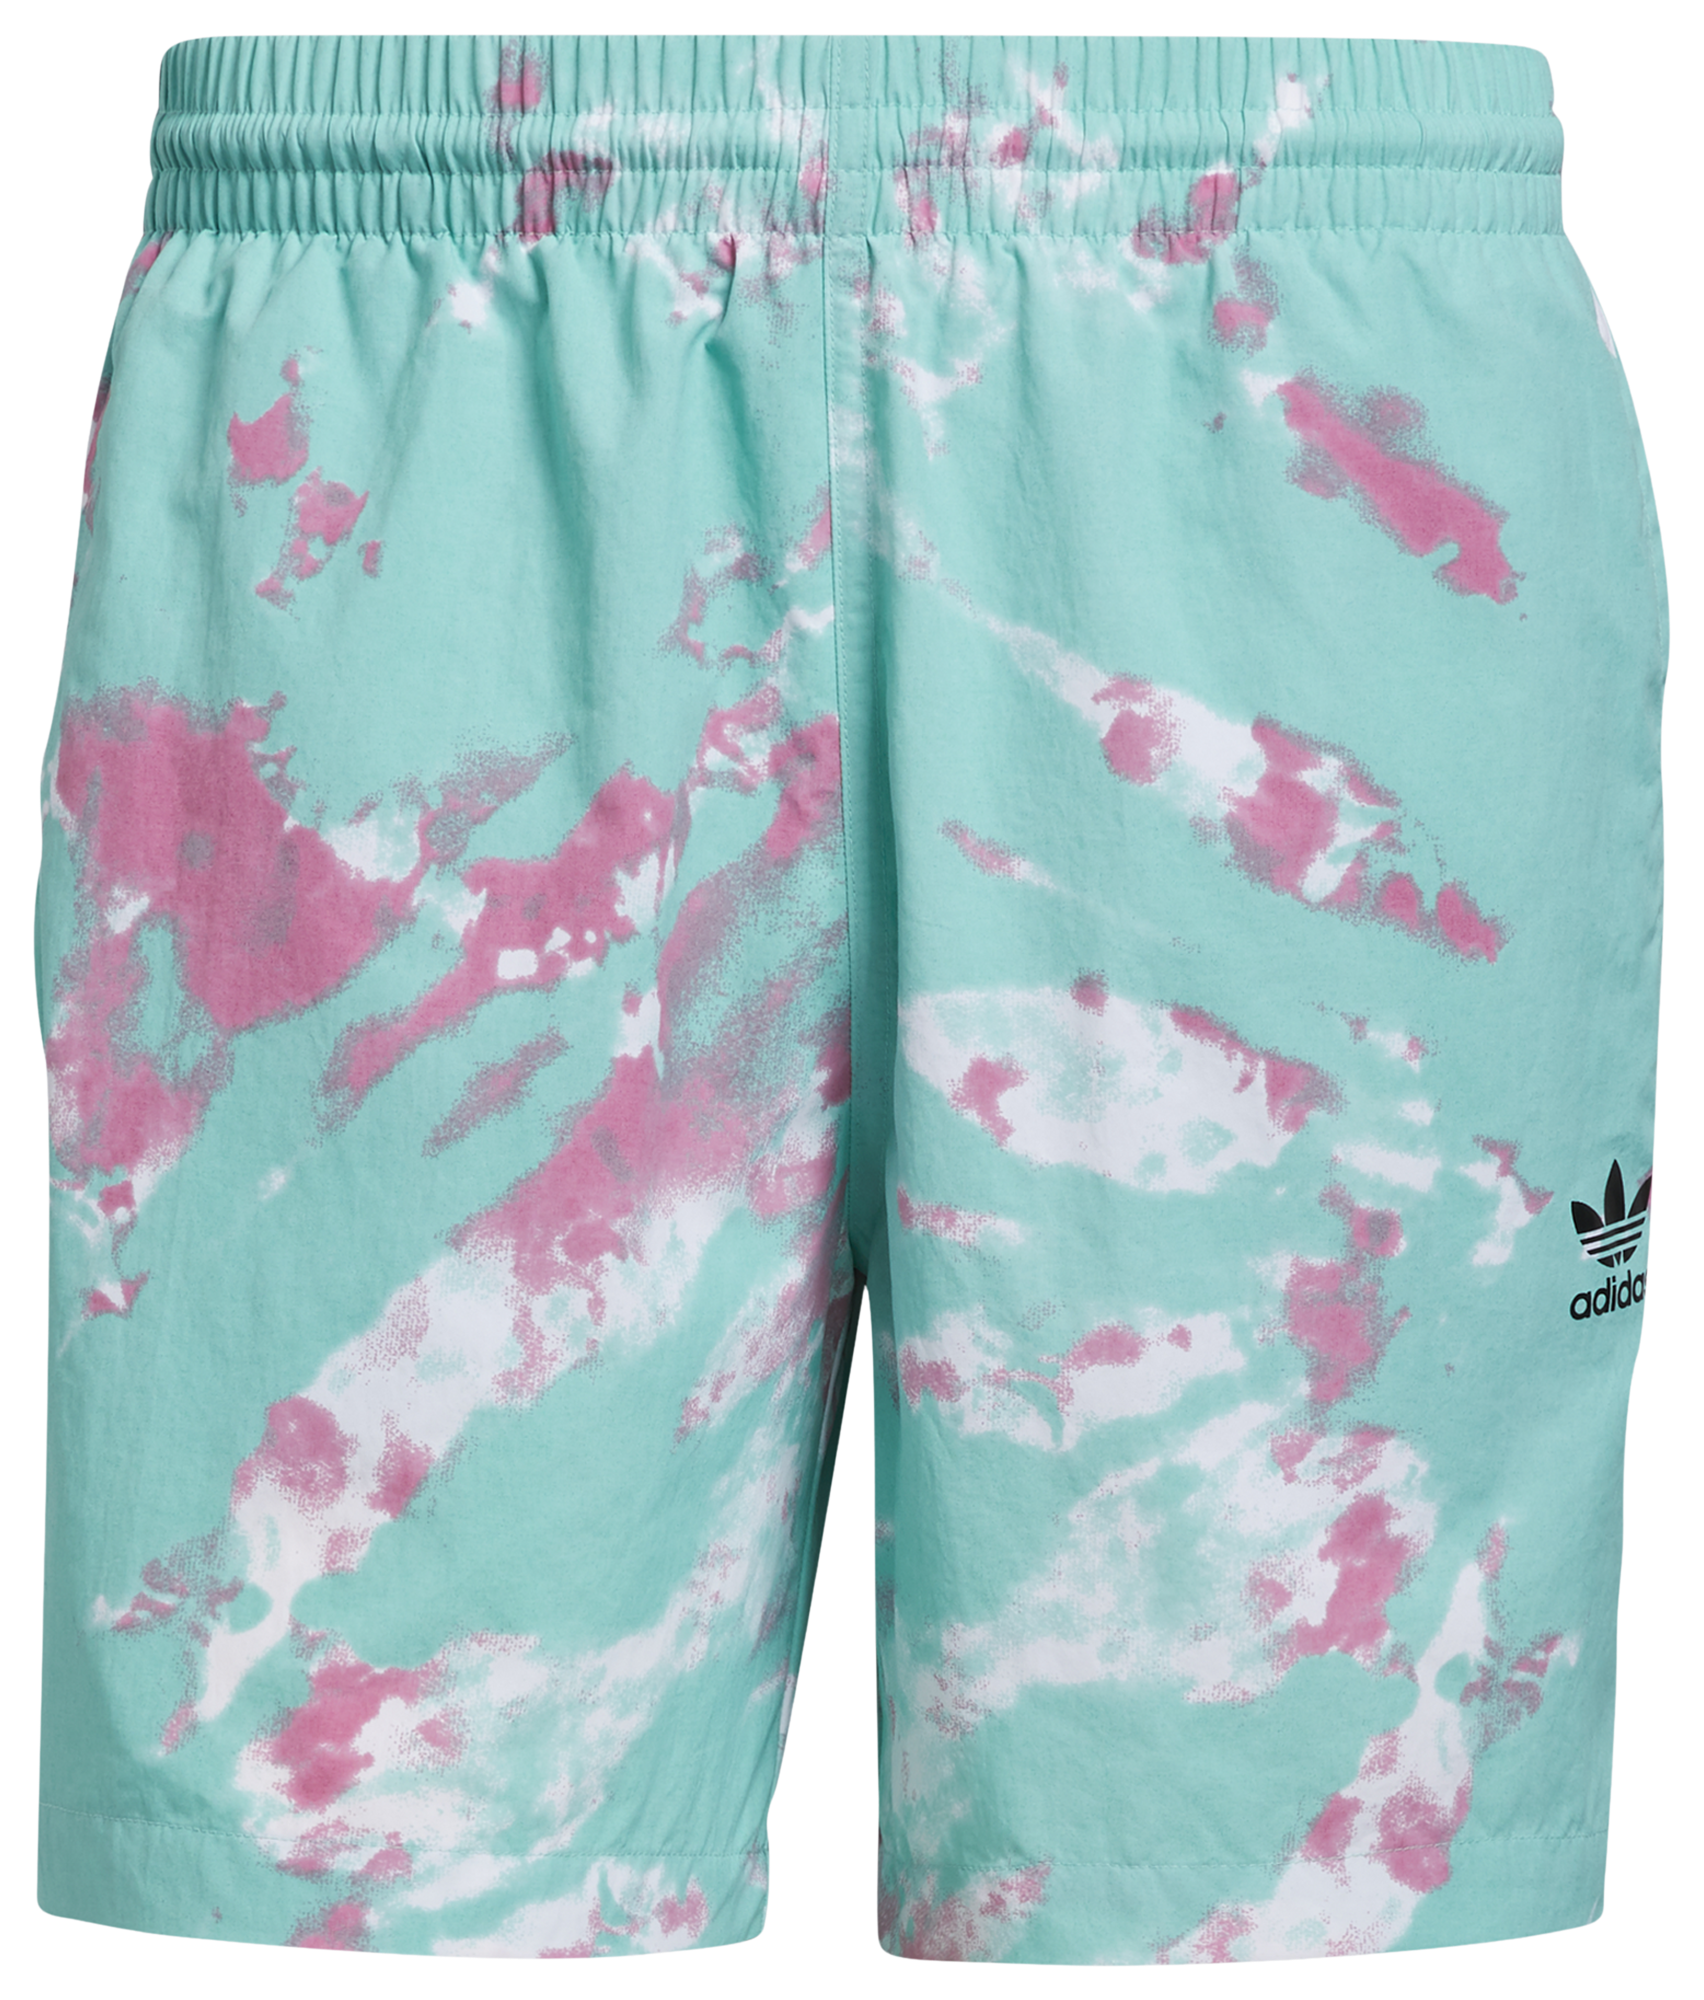 adidas Originals All Day I Dream About Summer Woven TieDye Shorts - Men's